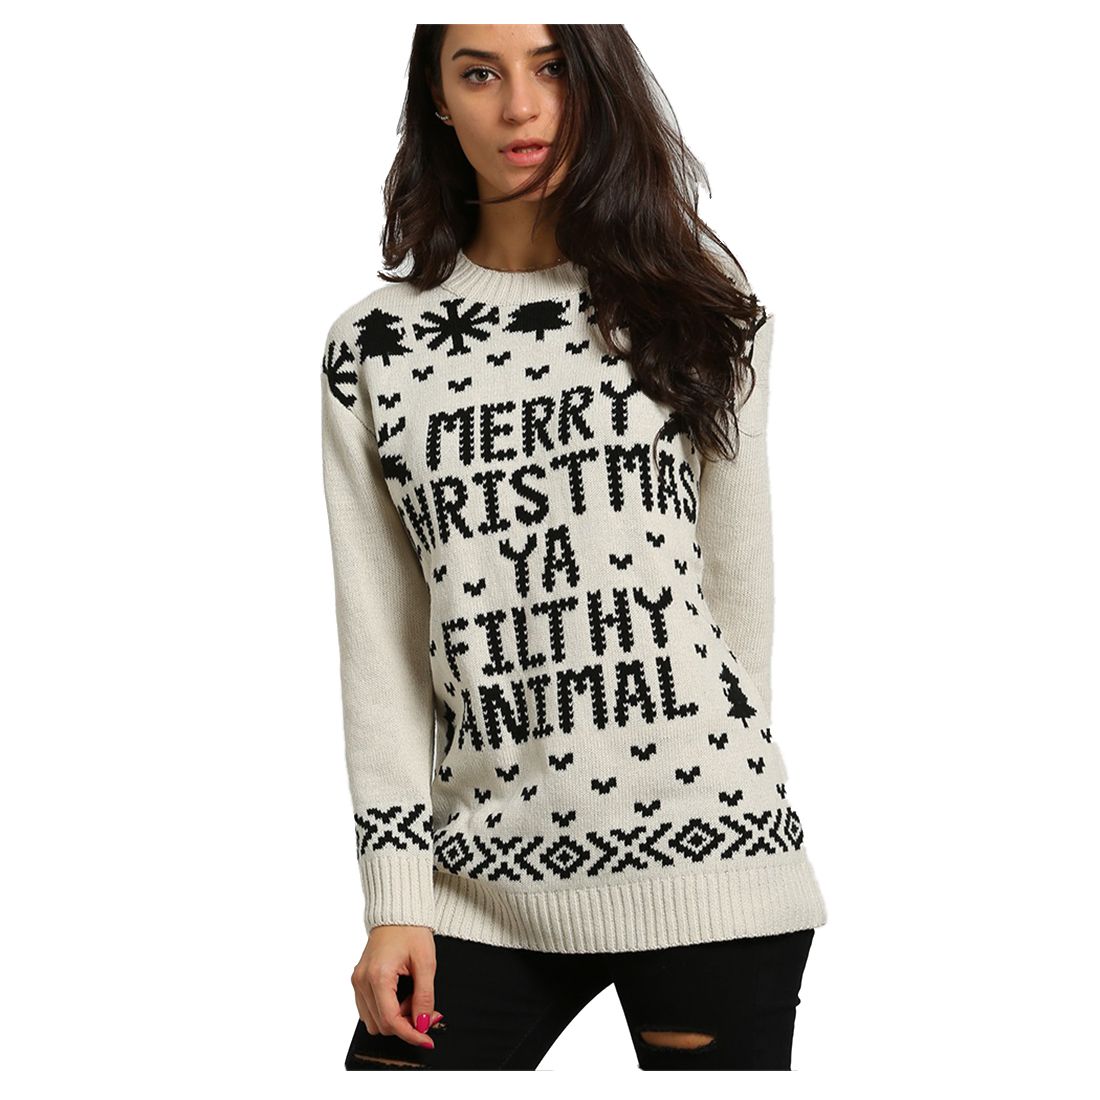 2018 Women Fashion Digital Knitted Women Merry Christmas Ya Filthy Animal Pullover Sweater WomanBeige From Vanilla10 $29 63